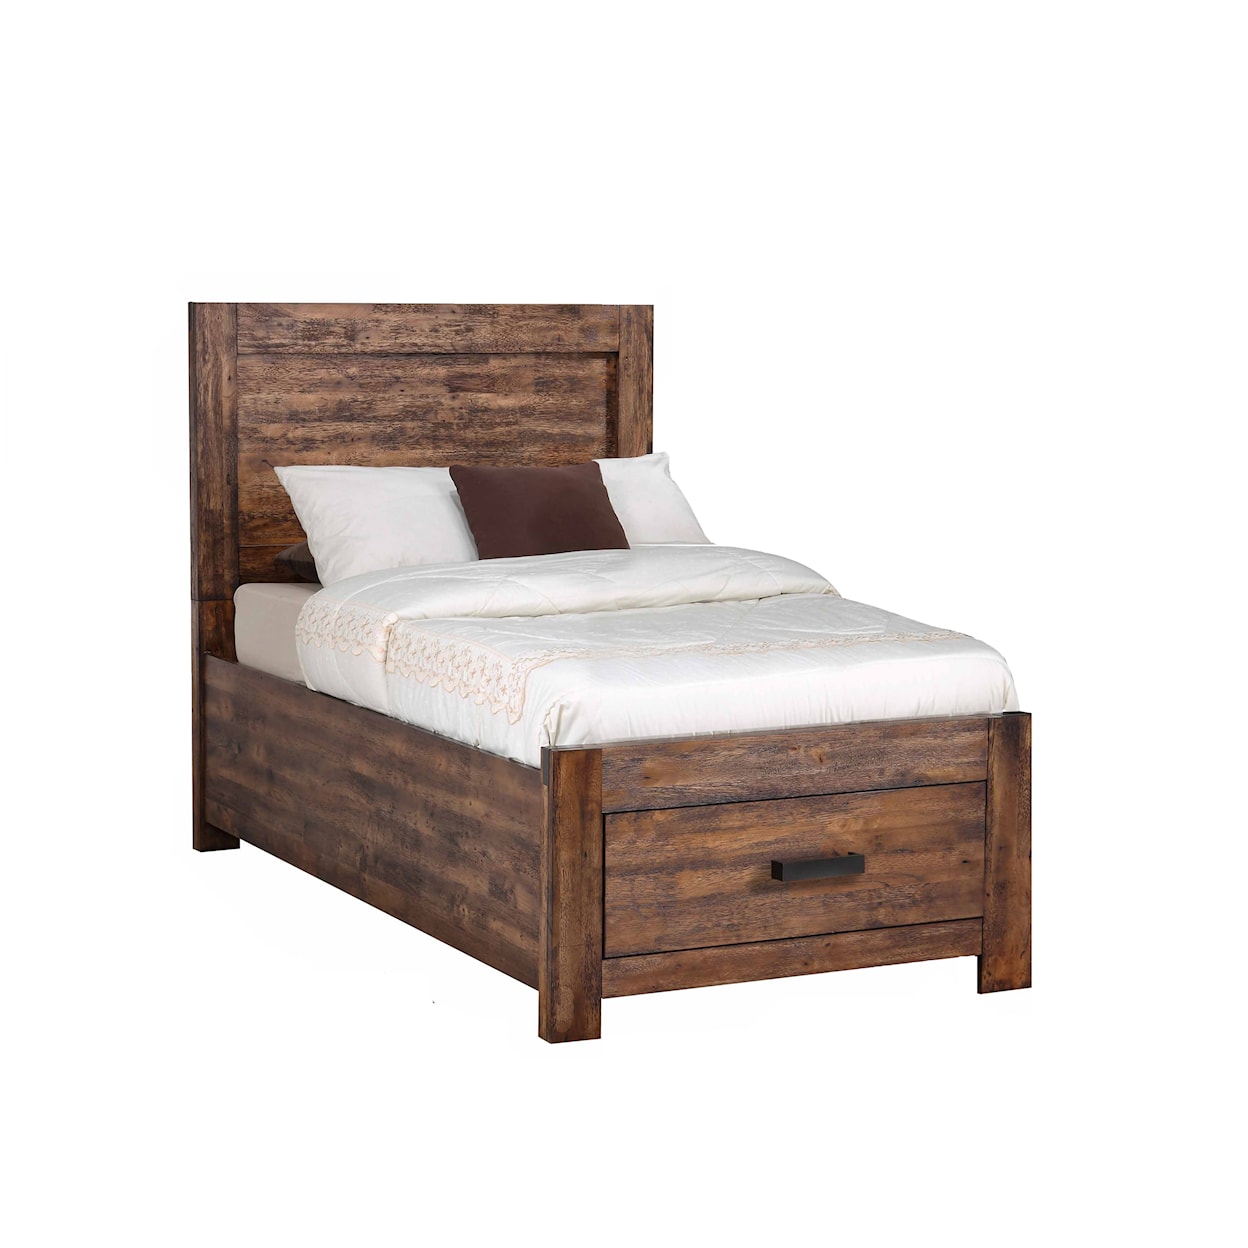 Elements Warner Youth Bed